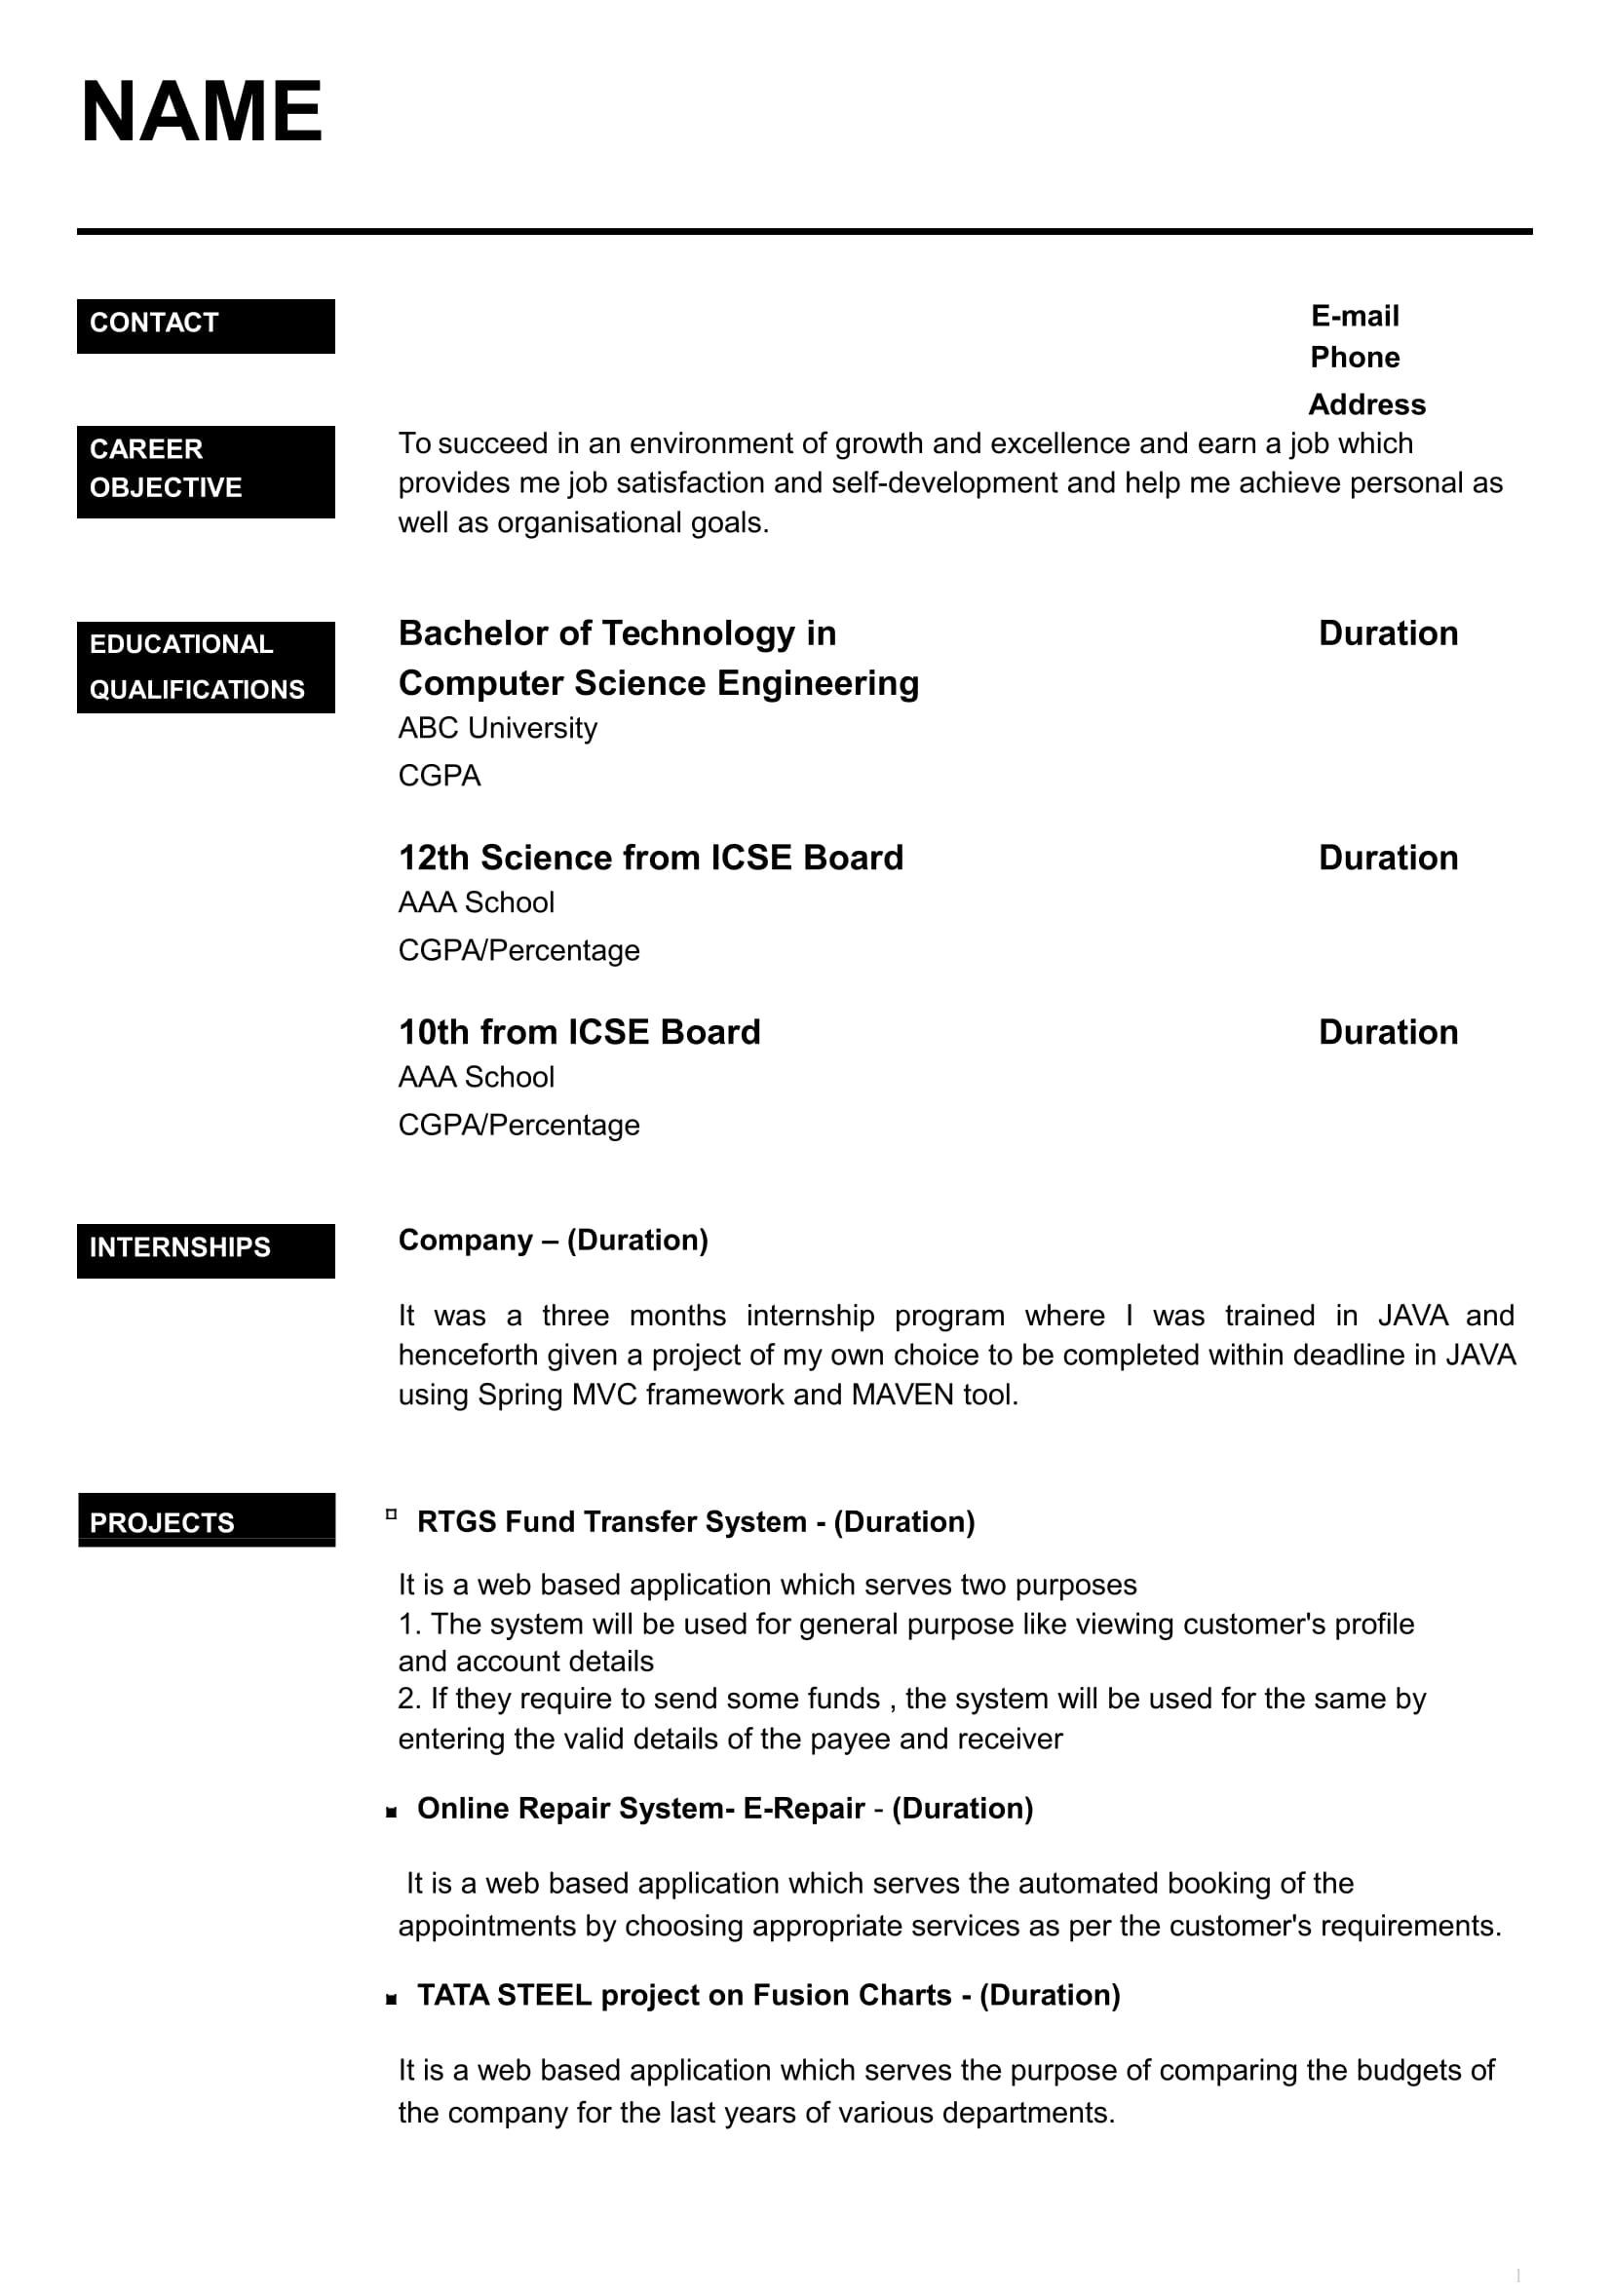 Sample Resume for Freshers Engineers Computer Science Cv for Freshers In Word – ‘google à¤¸à¤°à¥à¤’ Best Resume format …